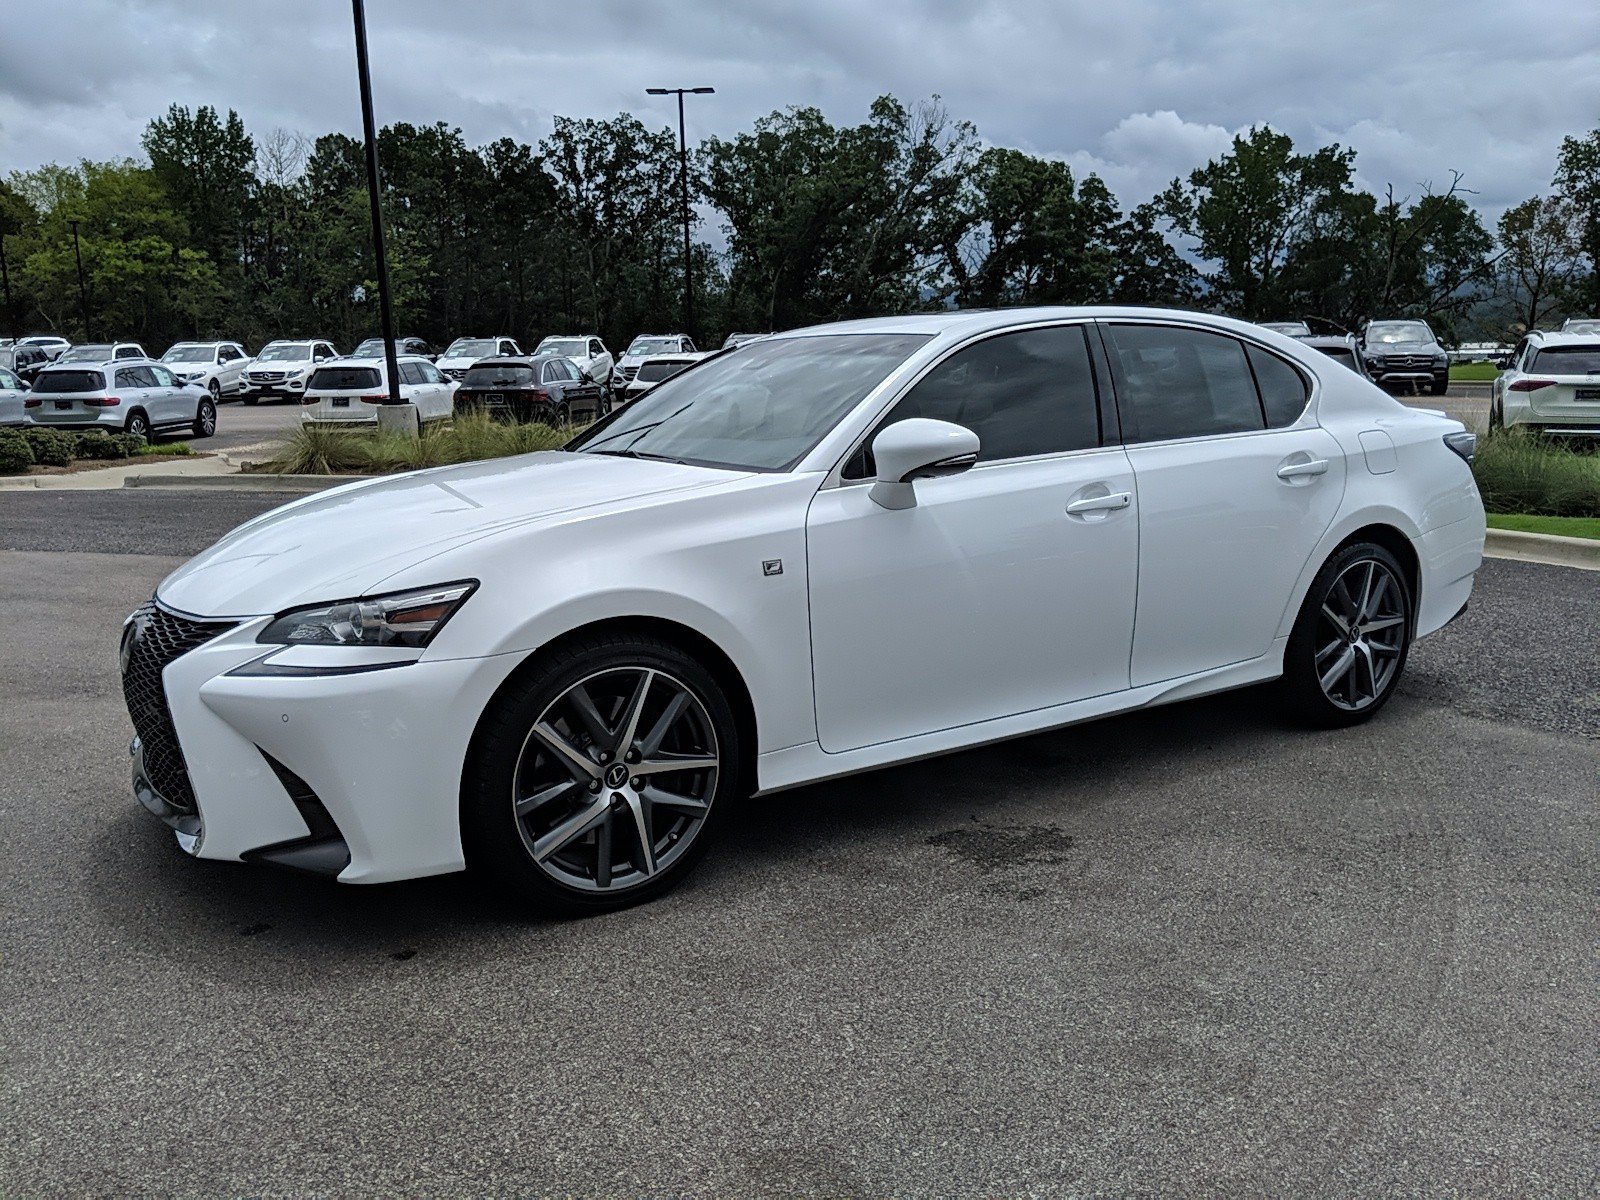 PreOwned 2019 Lexus GS 350 F Sport 4dr Car in Irondale 